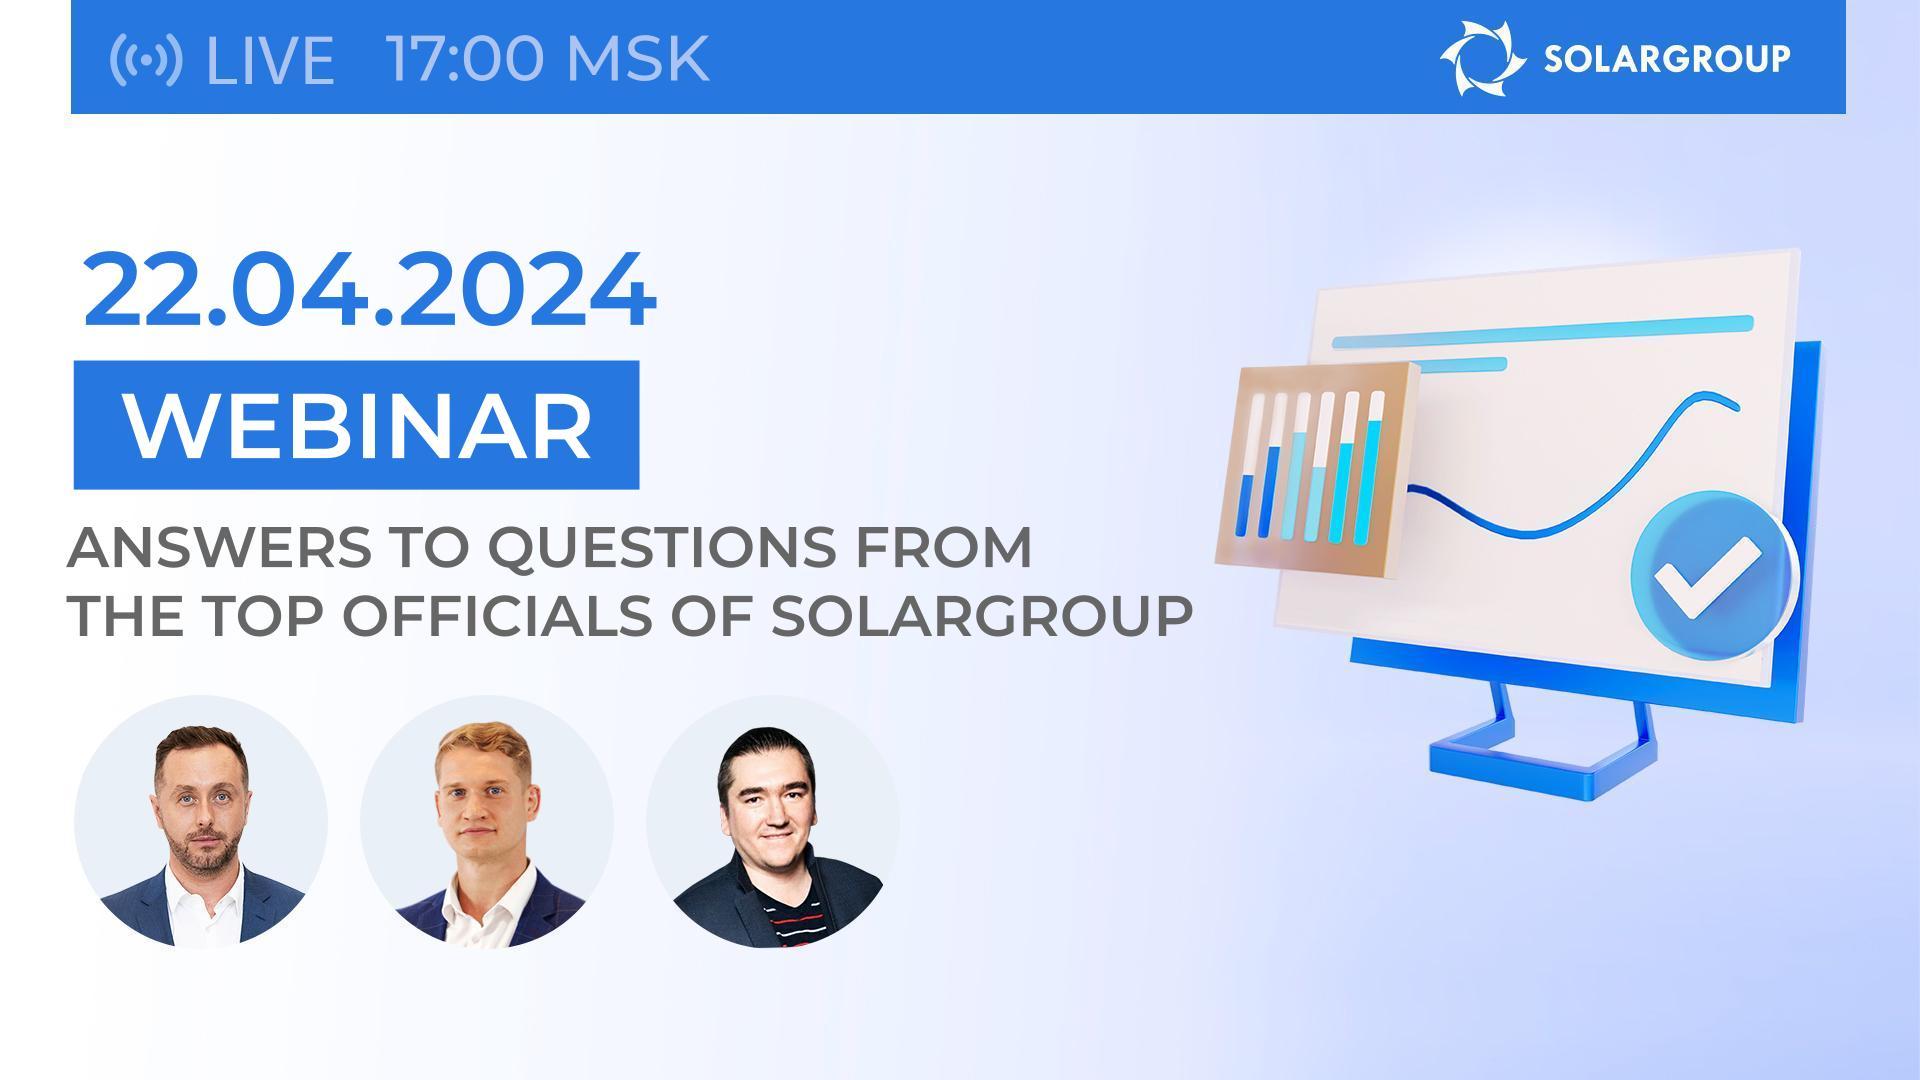 "Project news and results: live broadcast with the SOLARGROUP management "